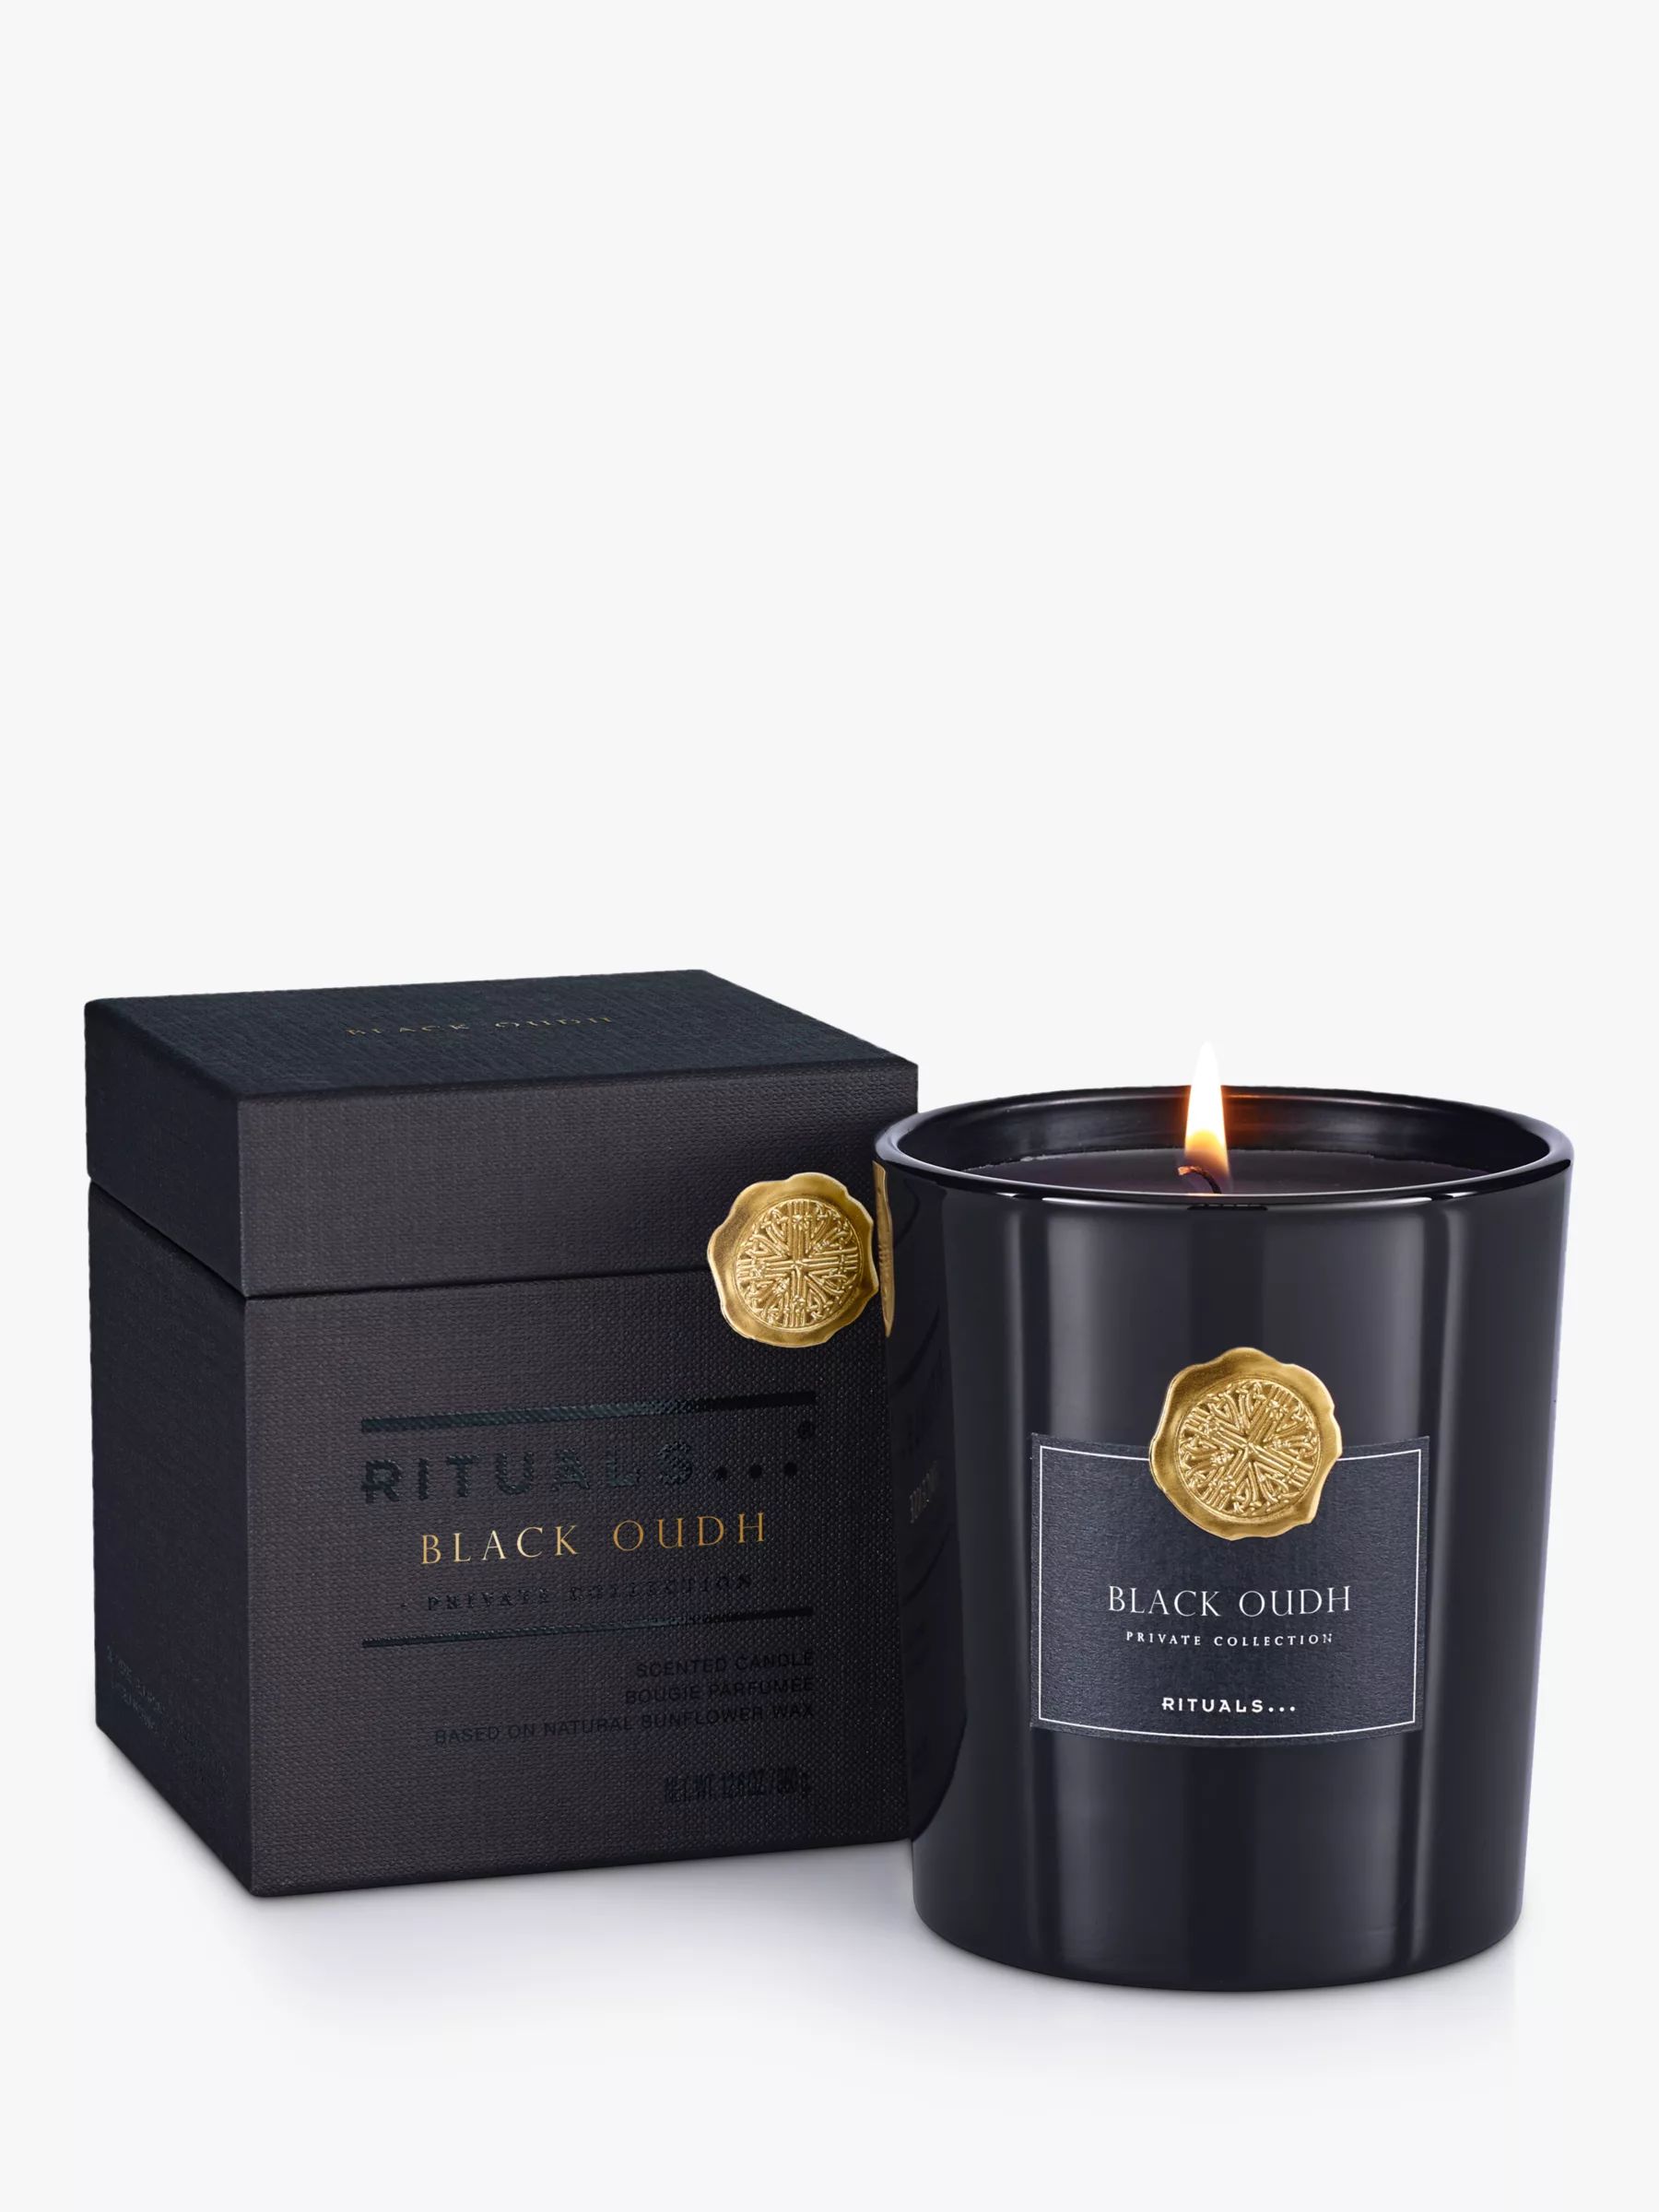 Rituals Private Collection Black Oudh Scented Candle, 360g | John Lewis (UK)